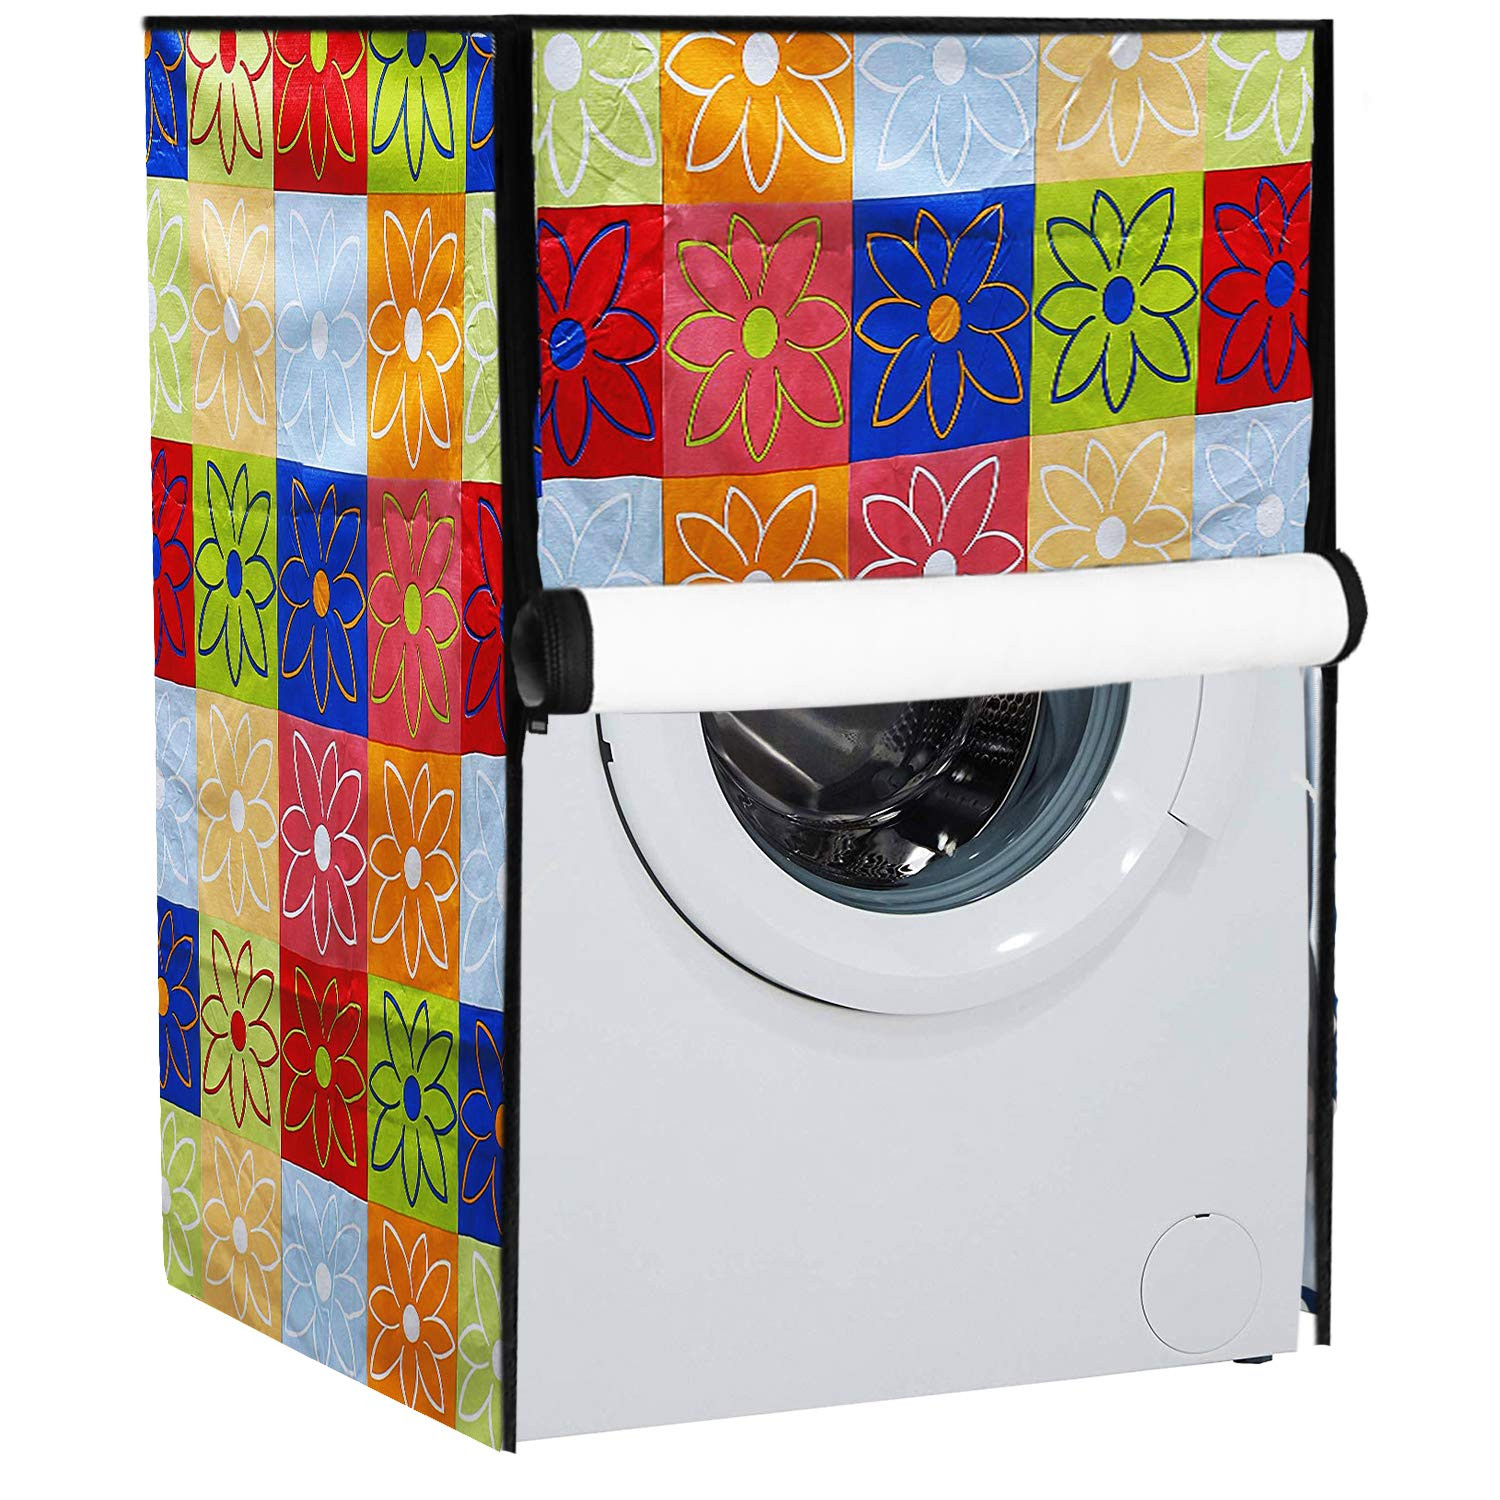 Kuber Industries Flower Design PVC Front Load Fully Automatic Washing Machine Cover with Back Hole (Multi) CTKTC33863